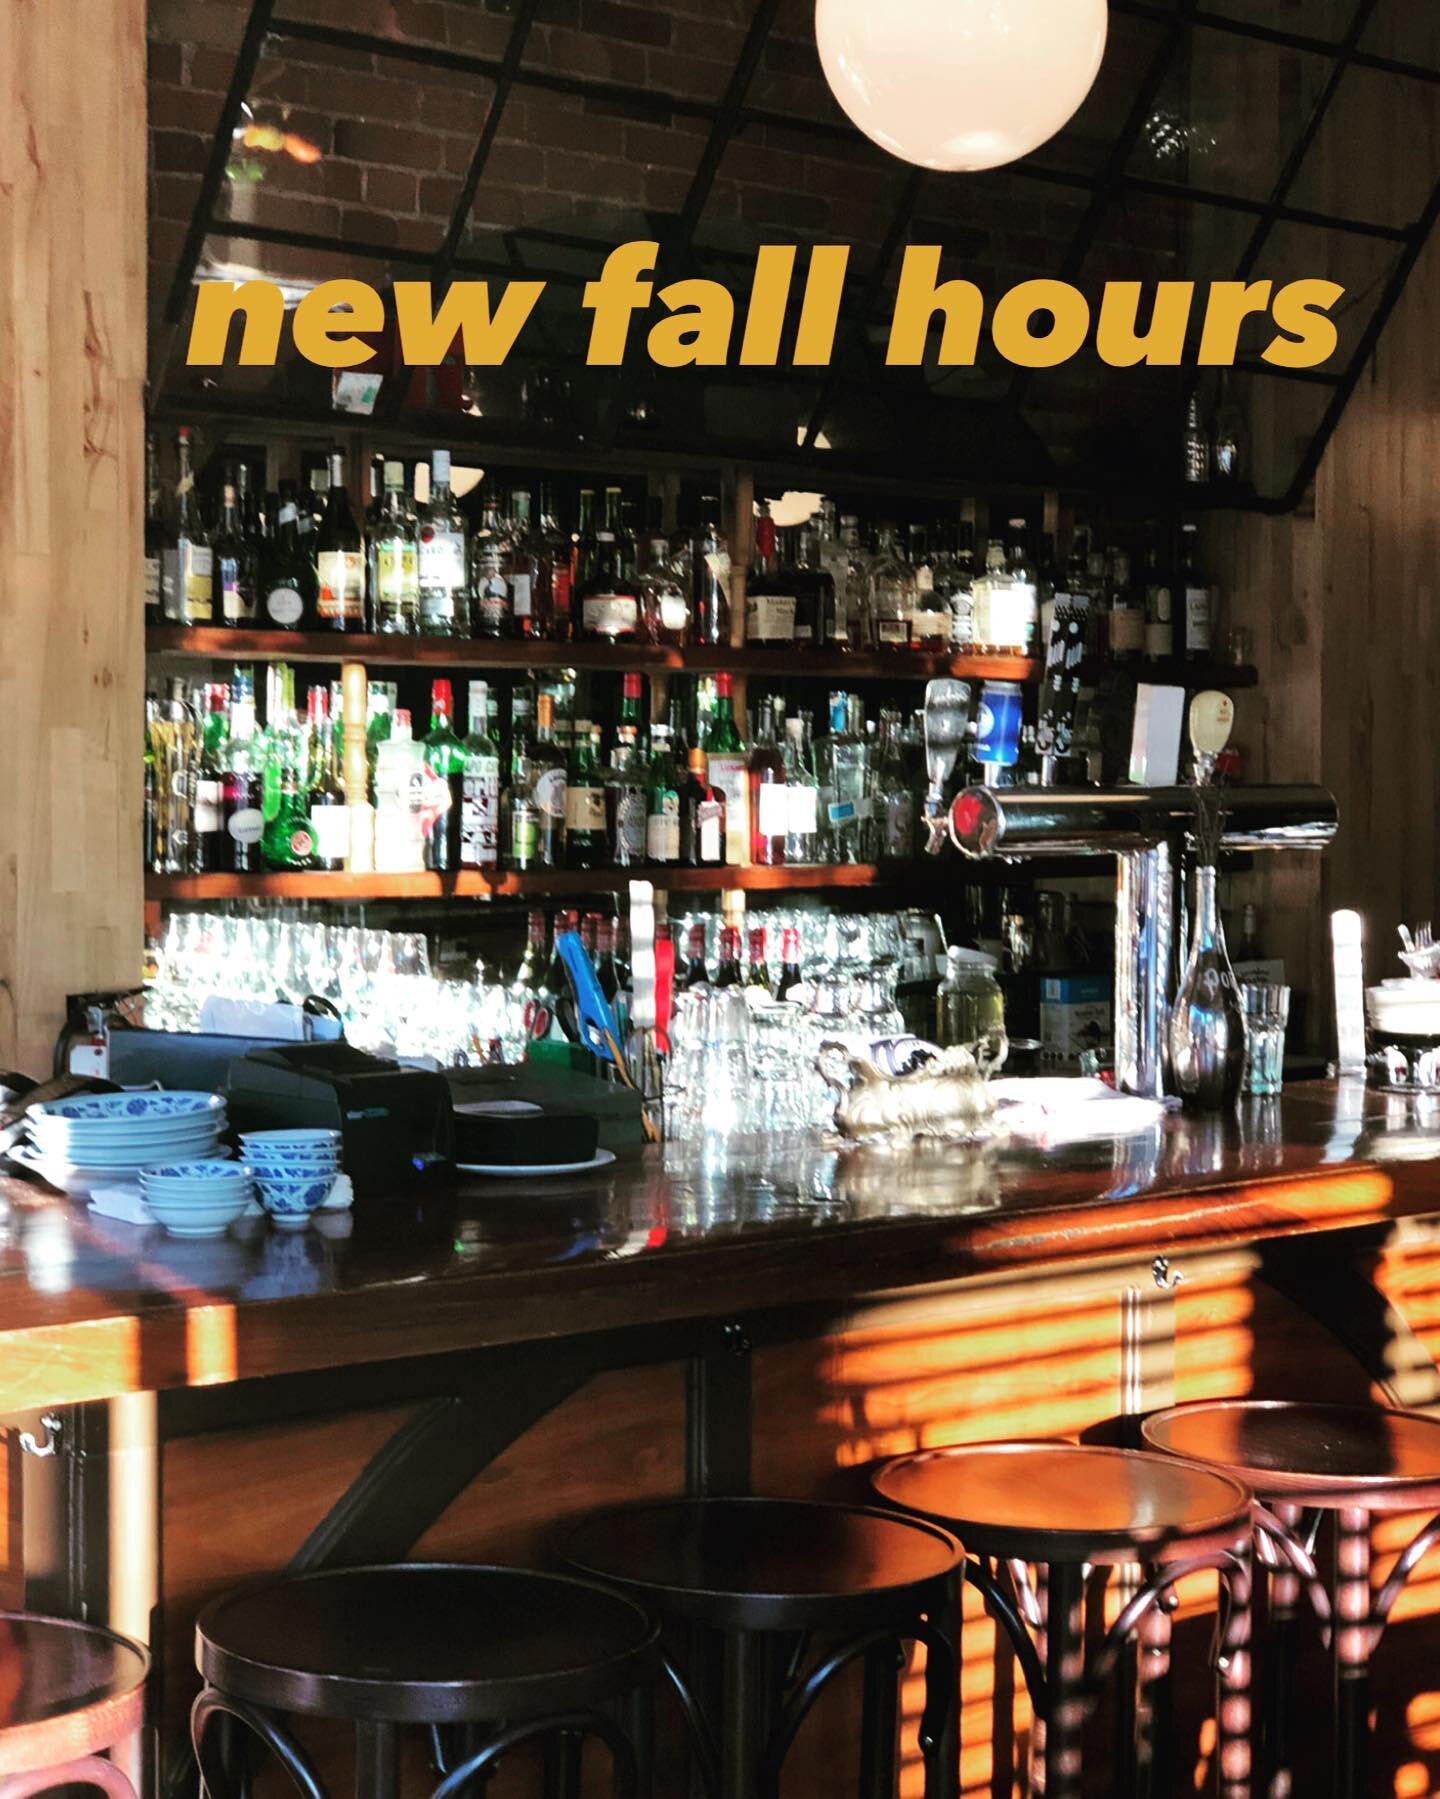 We&rsquo;re back and with new hours for the fall!

Monday: Closed
Tuesday-Thursday: 5pm-12am
Friday: 5pm-2am
Saturday: 3pm-2am
Sunday: 3pm-11pm

🍂✨